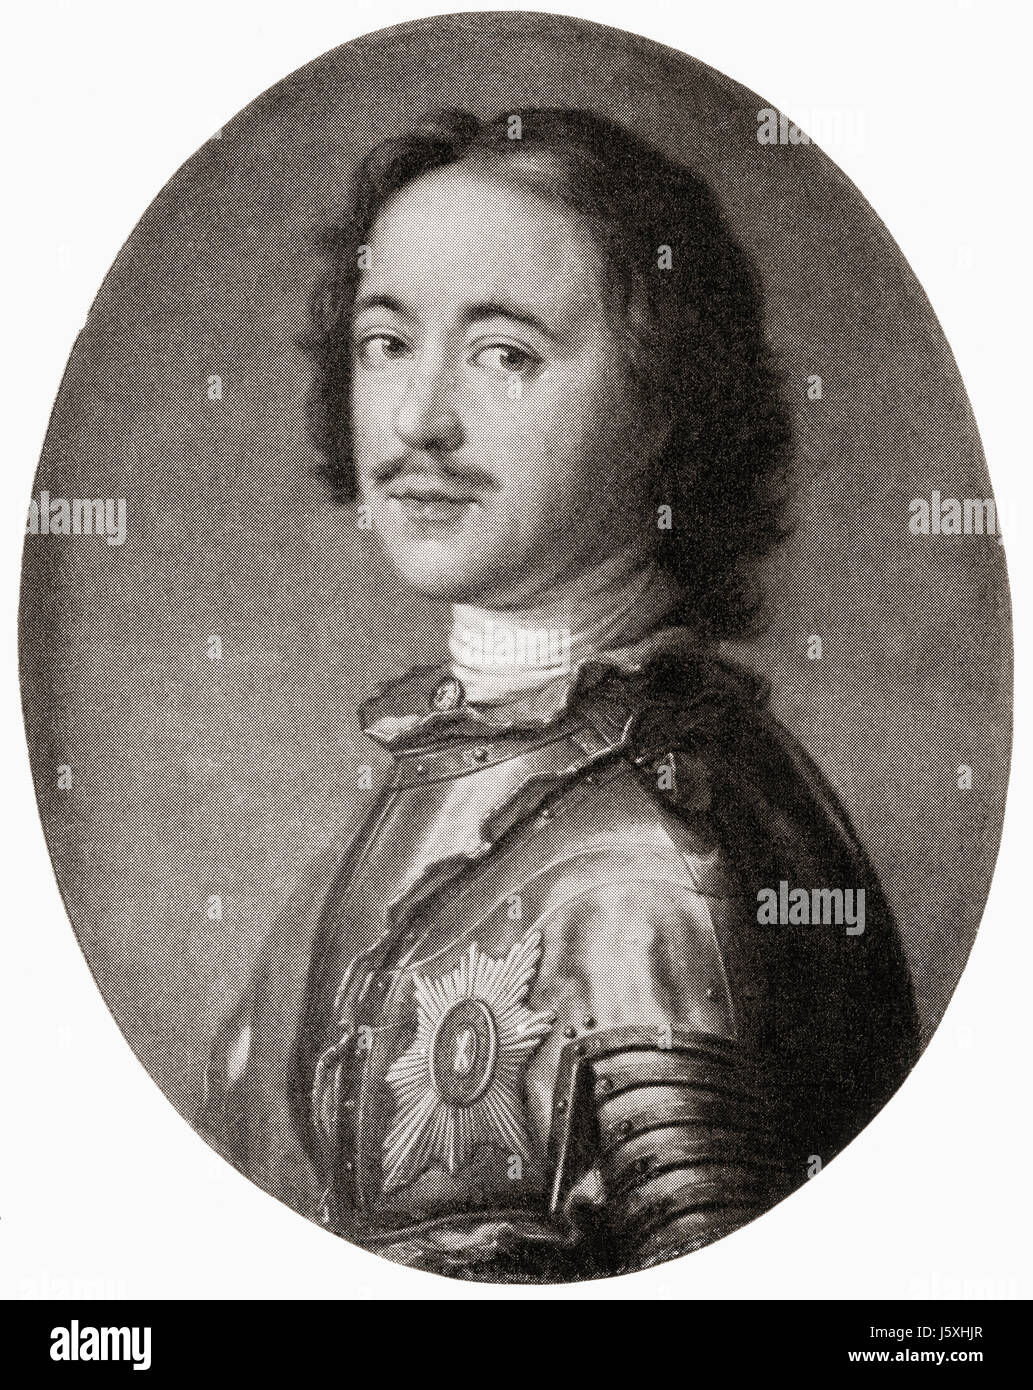 Peter the great the Tsardom of Russia. Луи Каравак портрет Петра 1. Peter the great PNG. Peter the great s